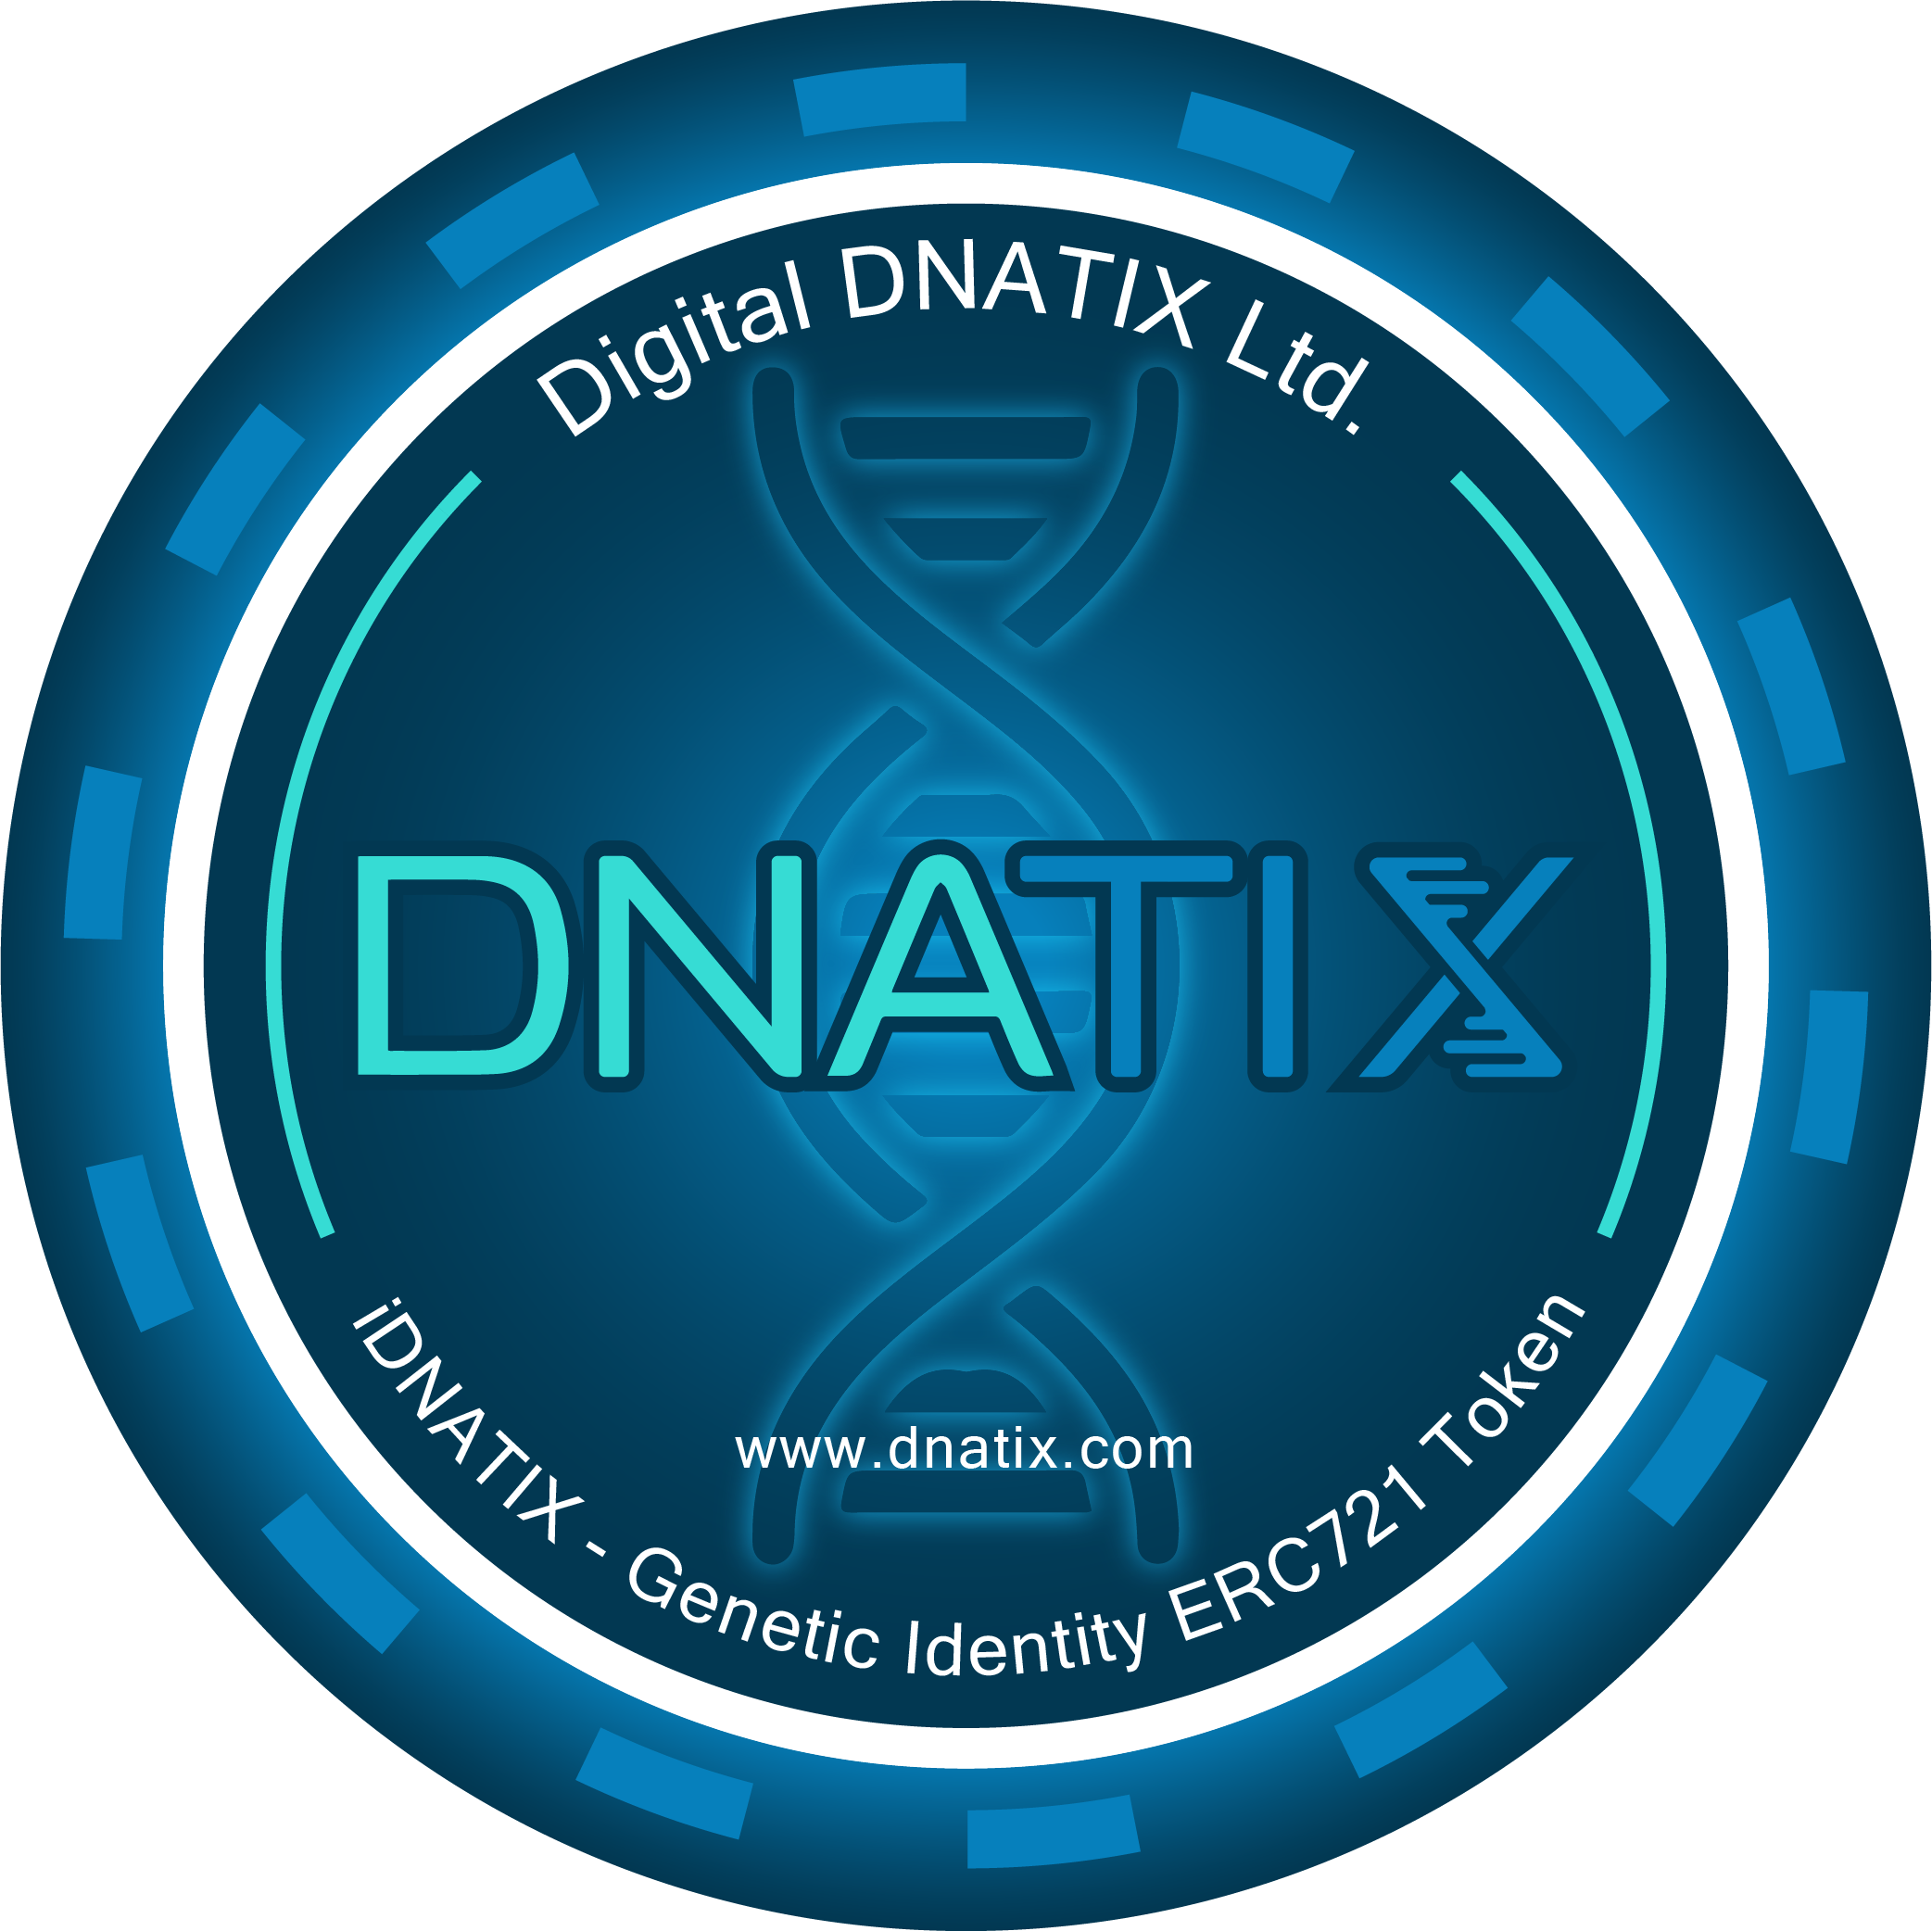 A US Patent for Personal Identity Management Using Blockchain Technology Was Granted to DNAtix